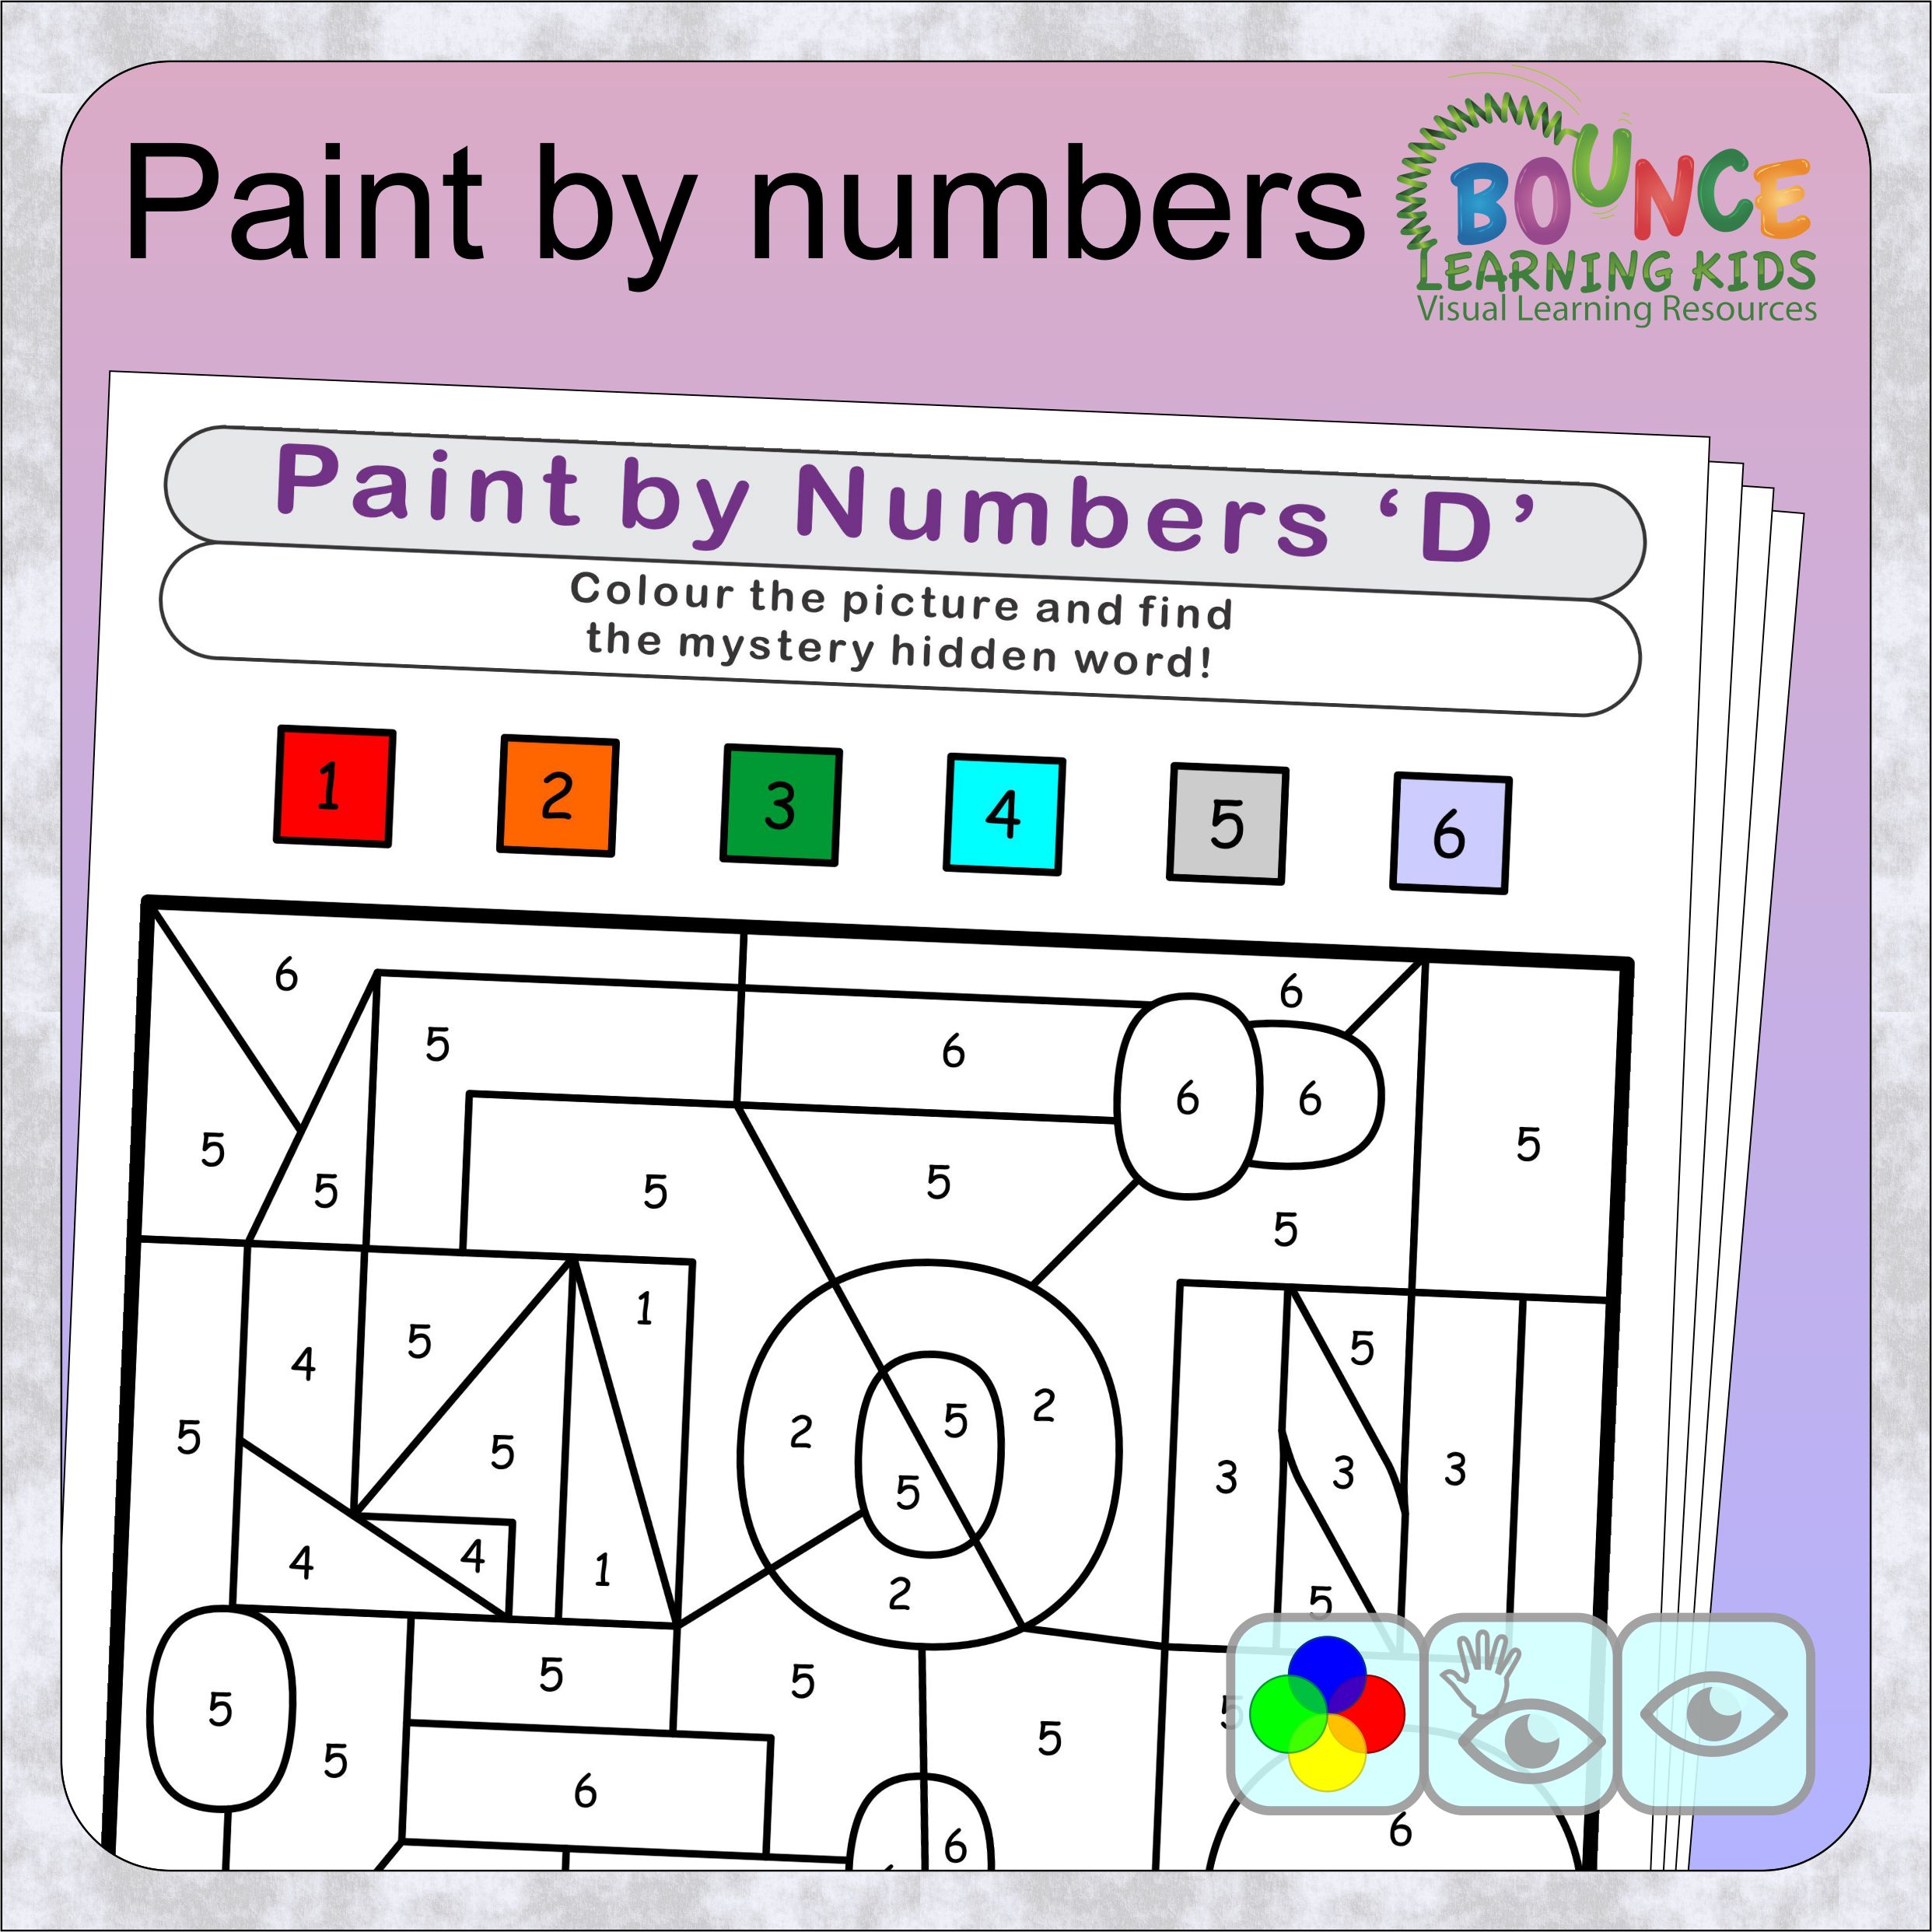 15-fun-paint-by-numbers-worksheets-to-download-and-color-in